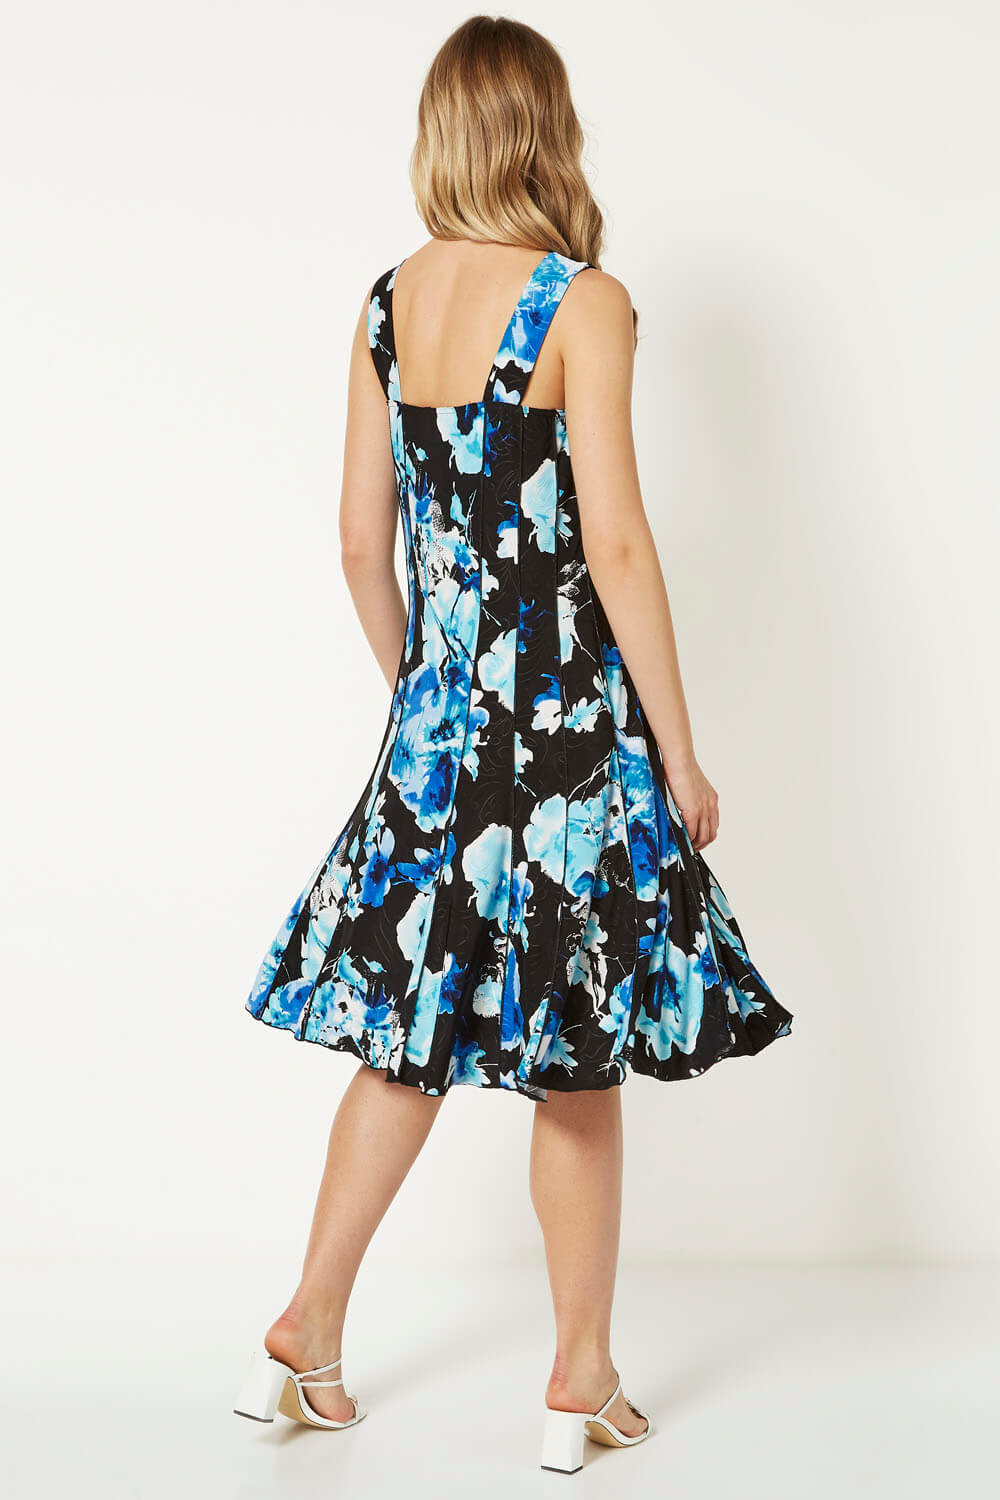 Black Floral Print Panel Fit and Flare Dress, Image 2 of 4